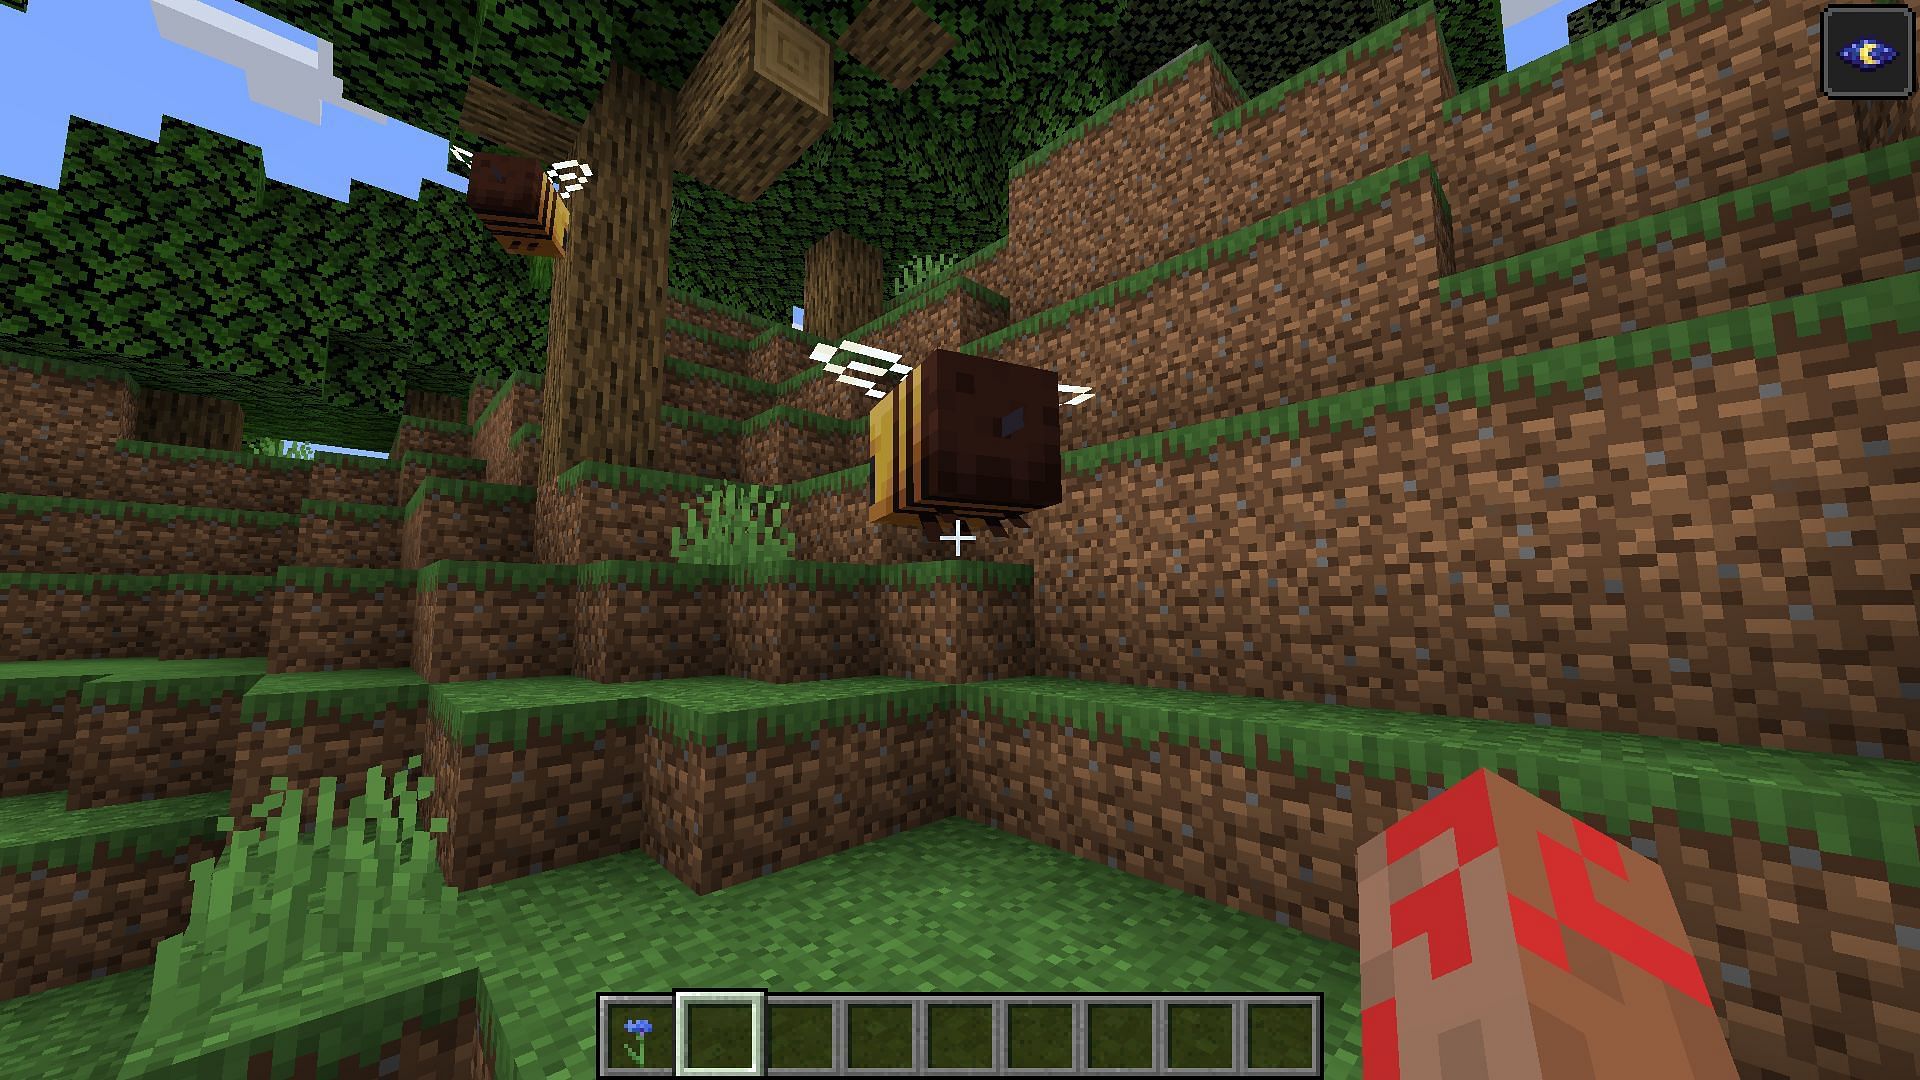 Bees do not fly in terms of Minecraft mechanics; they hover instead (Image via Mojang)